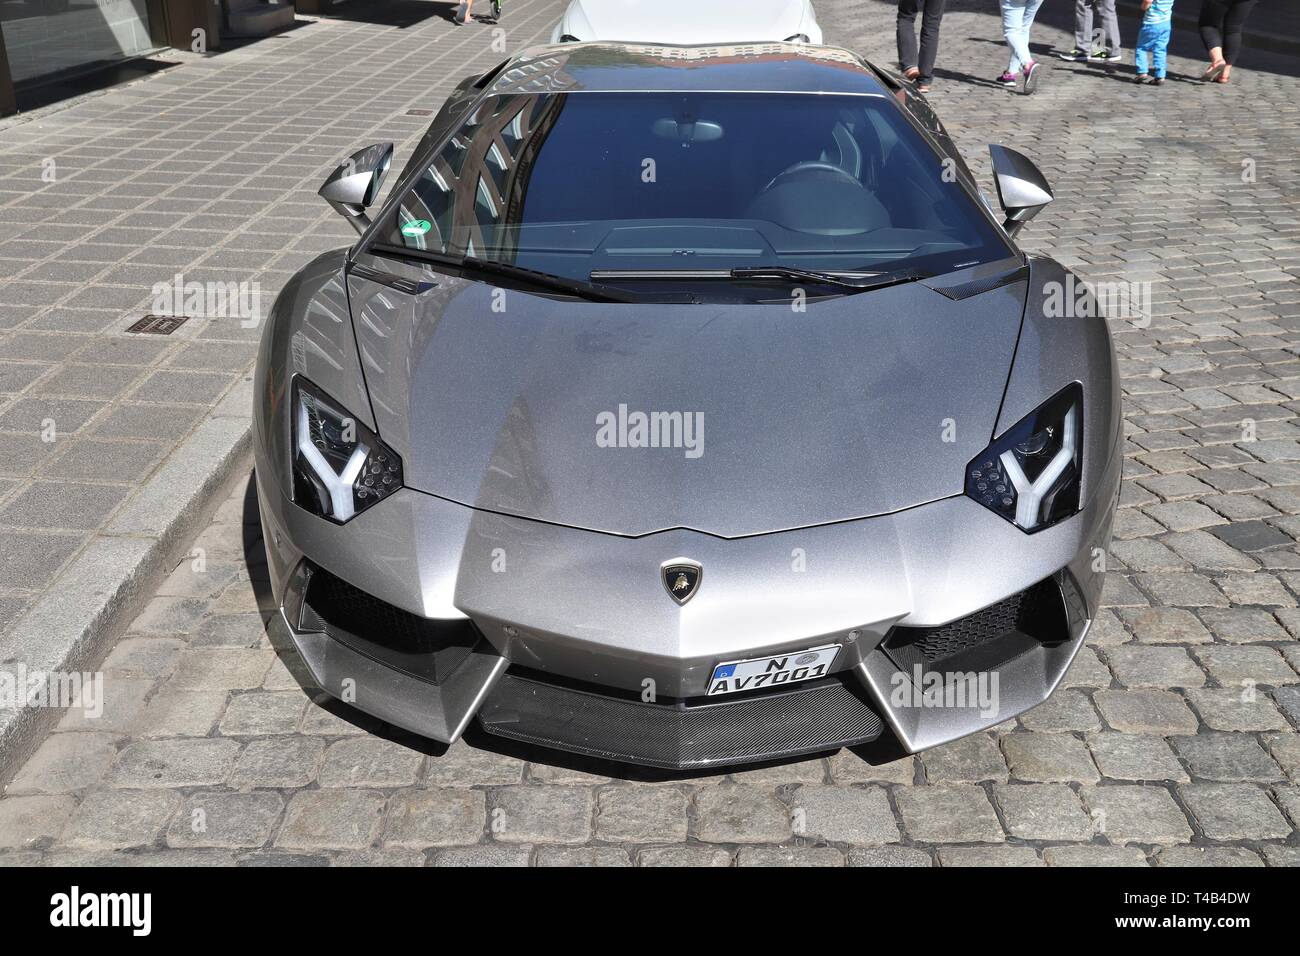 NUREMBERG, GERMANY - MAY 6, 2018: Lamborghini Aventador luxury sports car parked in Germany. The car was designed by Filippo Perini. Stock Photo